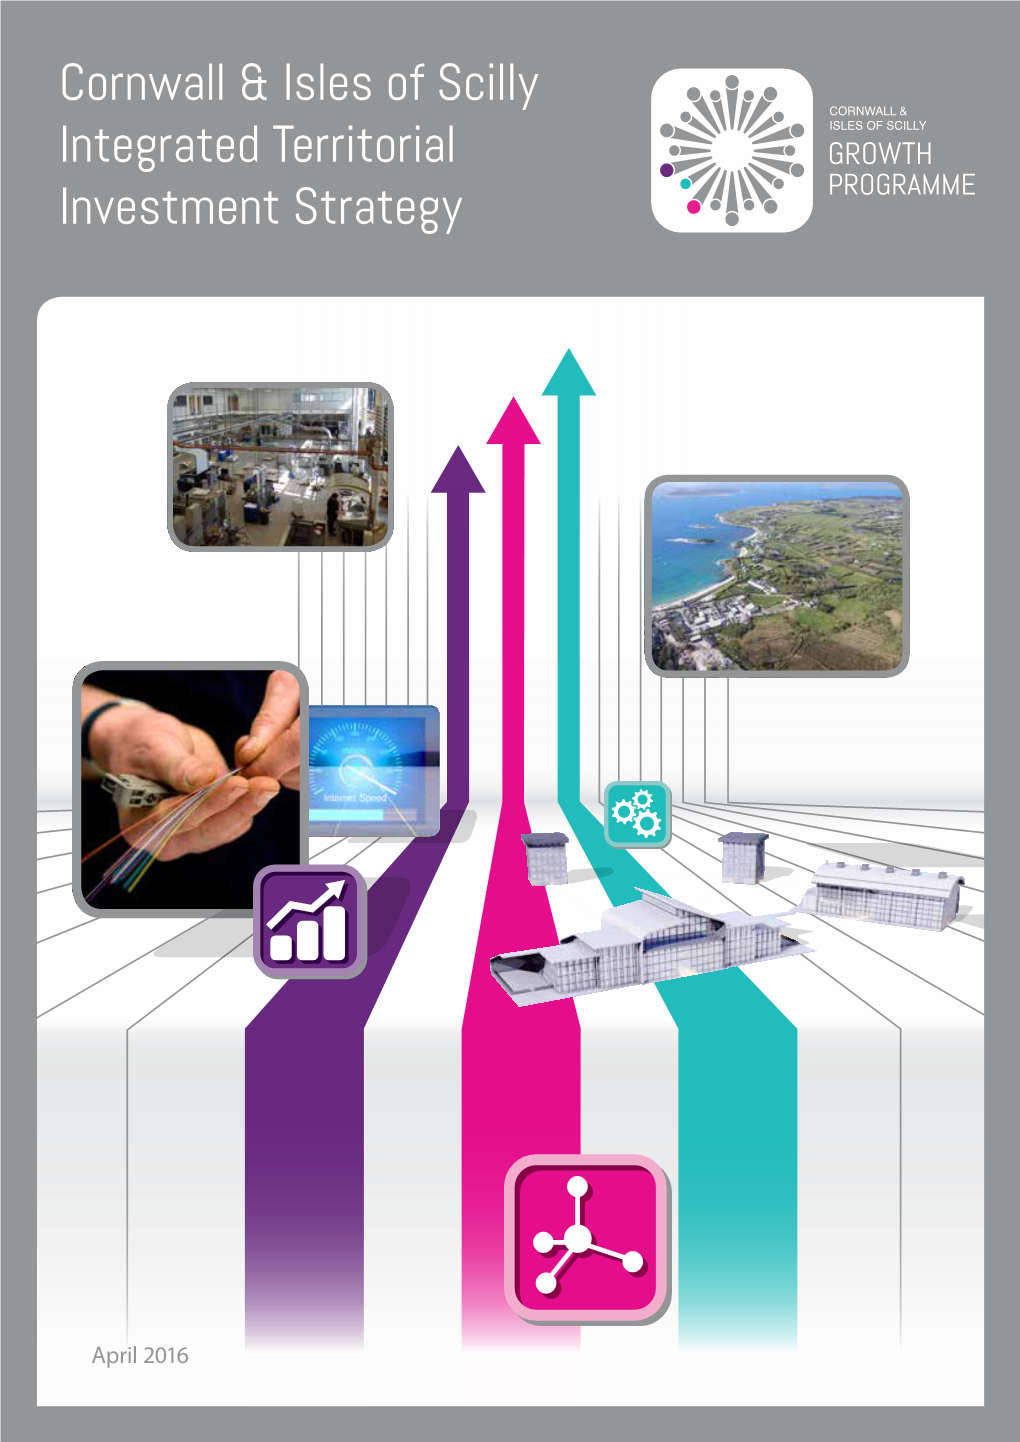 Cornwall & Isles of Scilly Integrated Territorial Investment Strategy